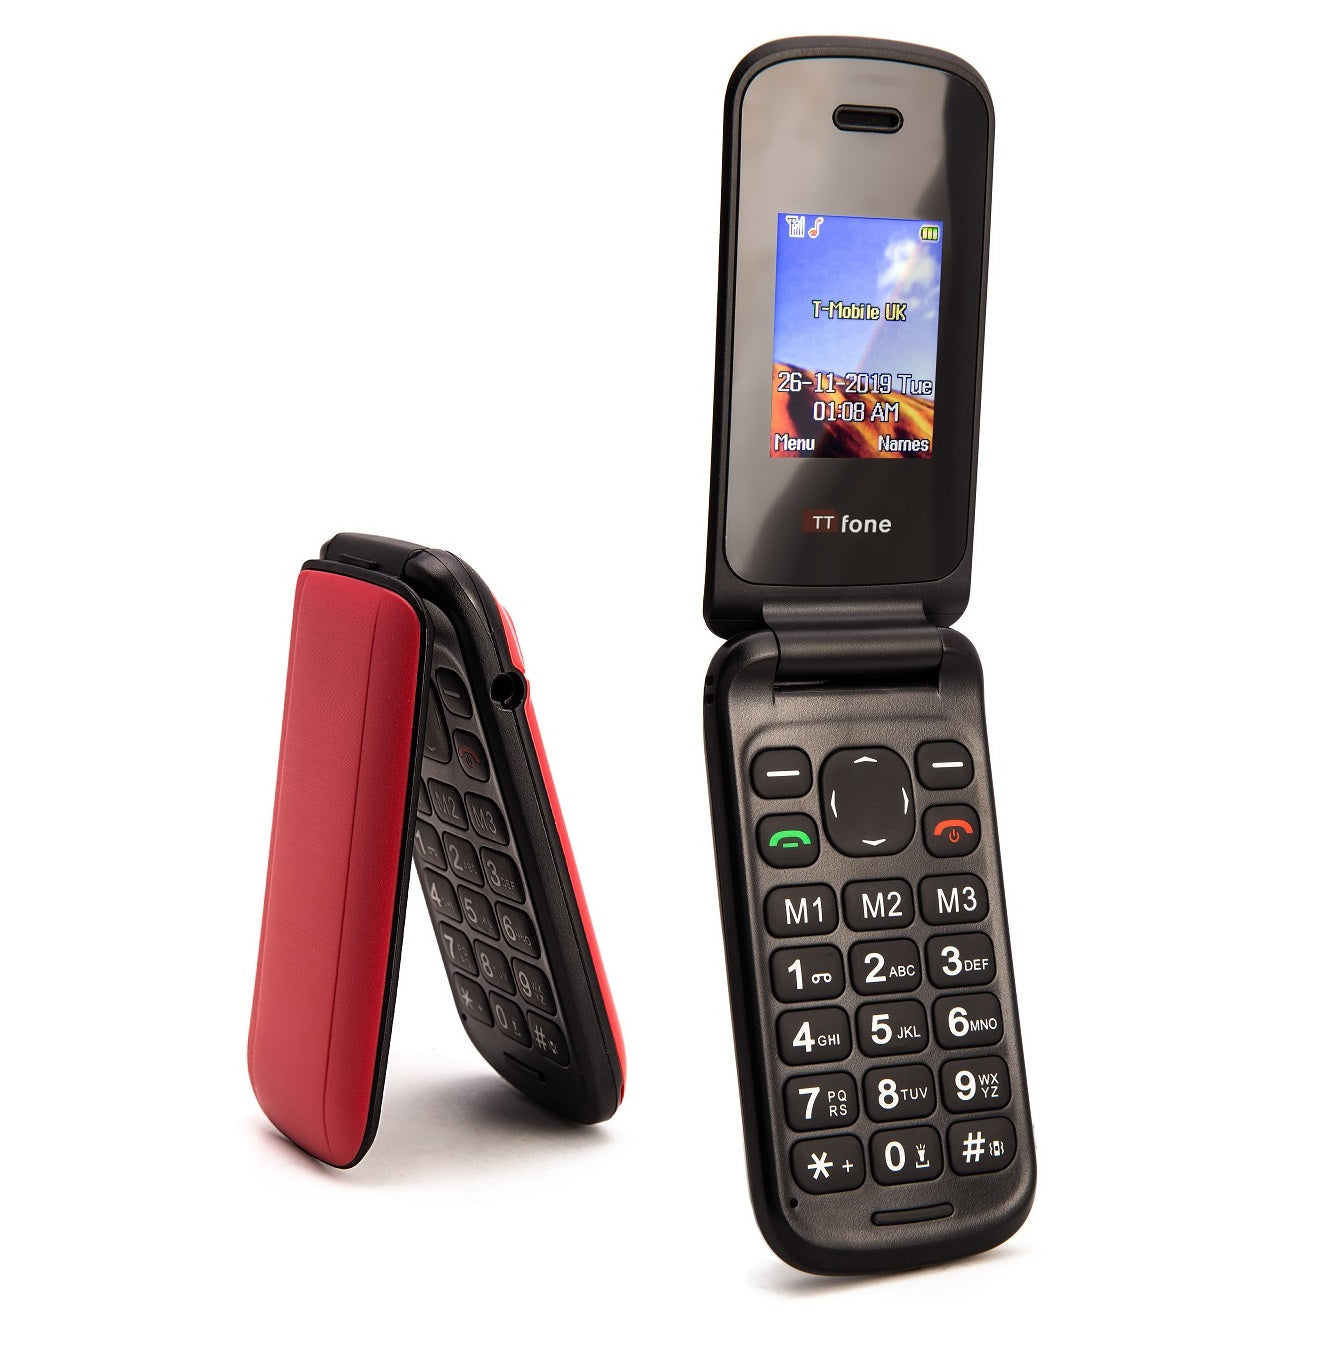 TTfone TT140 Red Flip Folding Phone with Mains Charger, O2 pay as you go